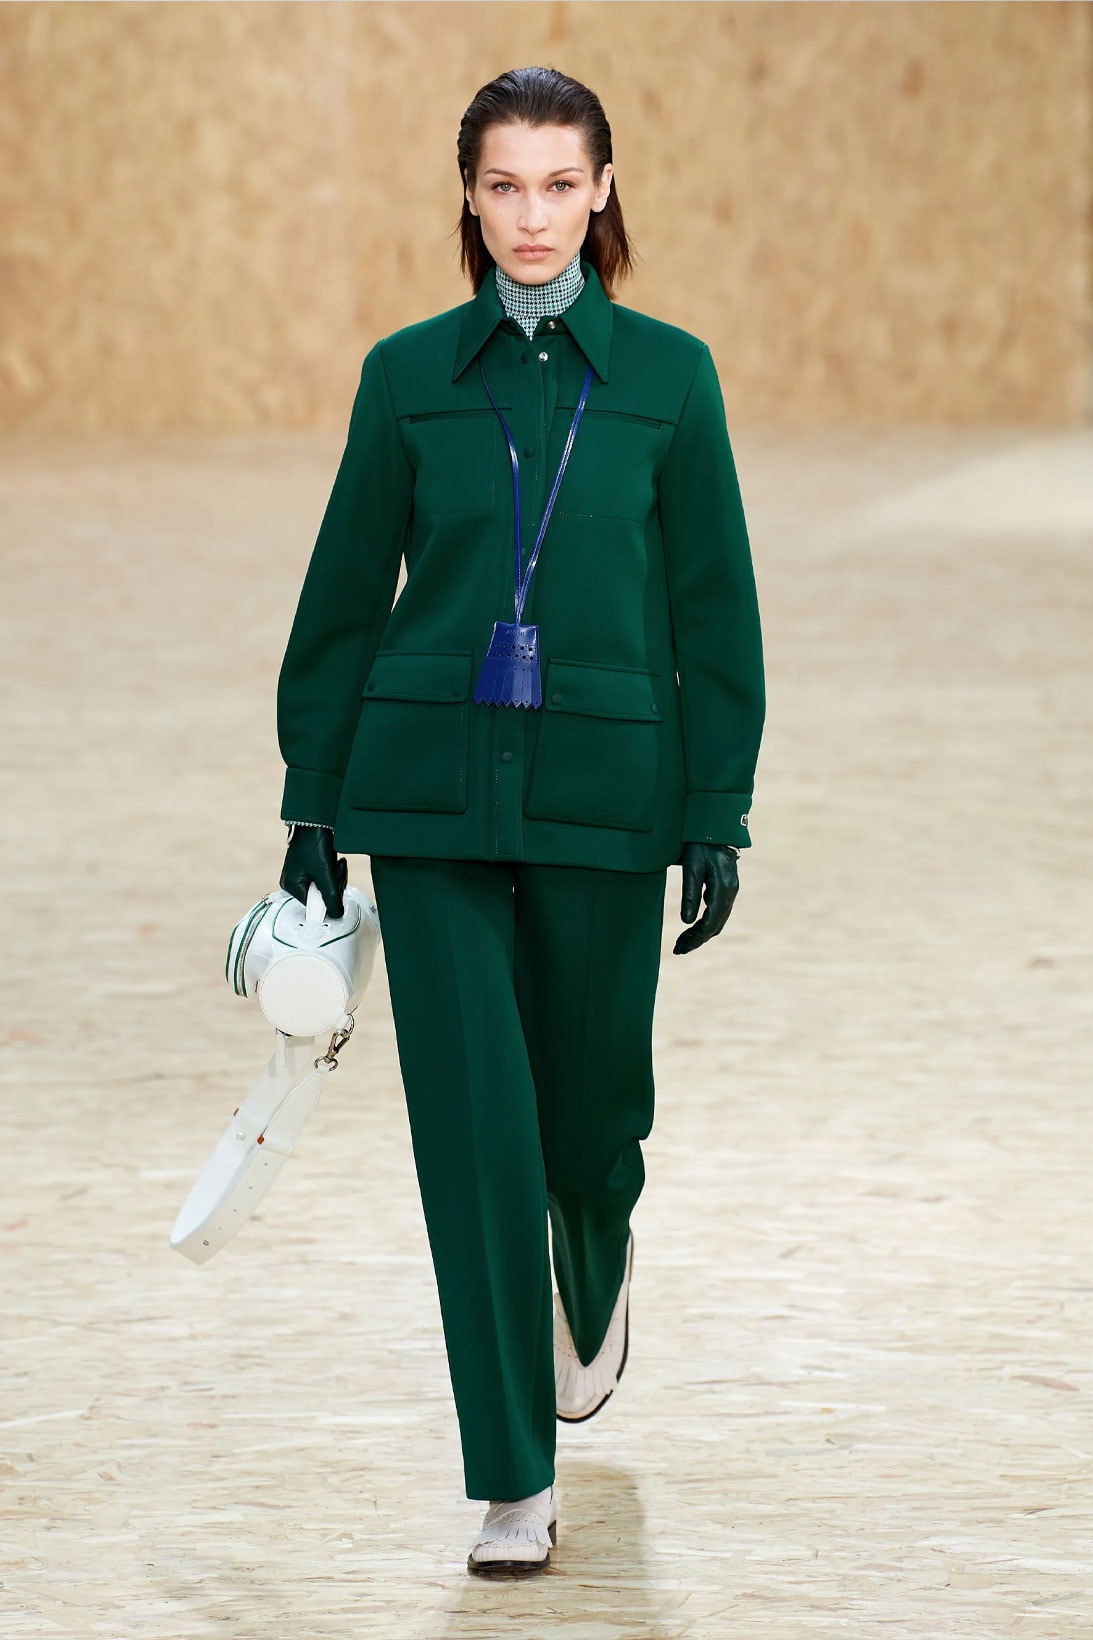 Louise Trotter, BoF 500